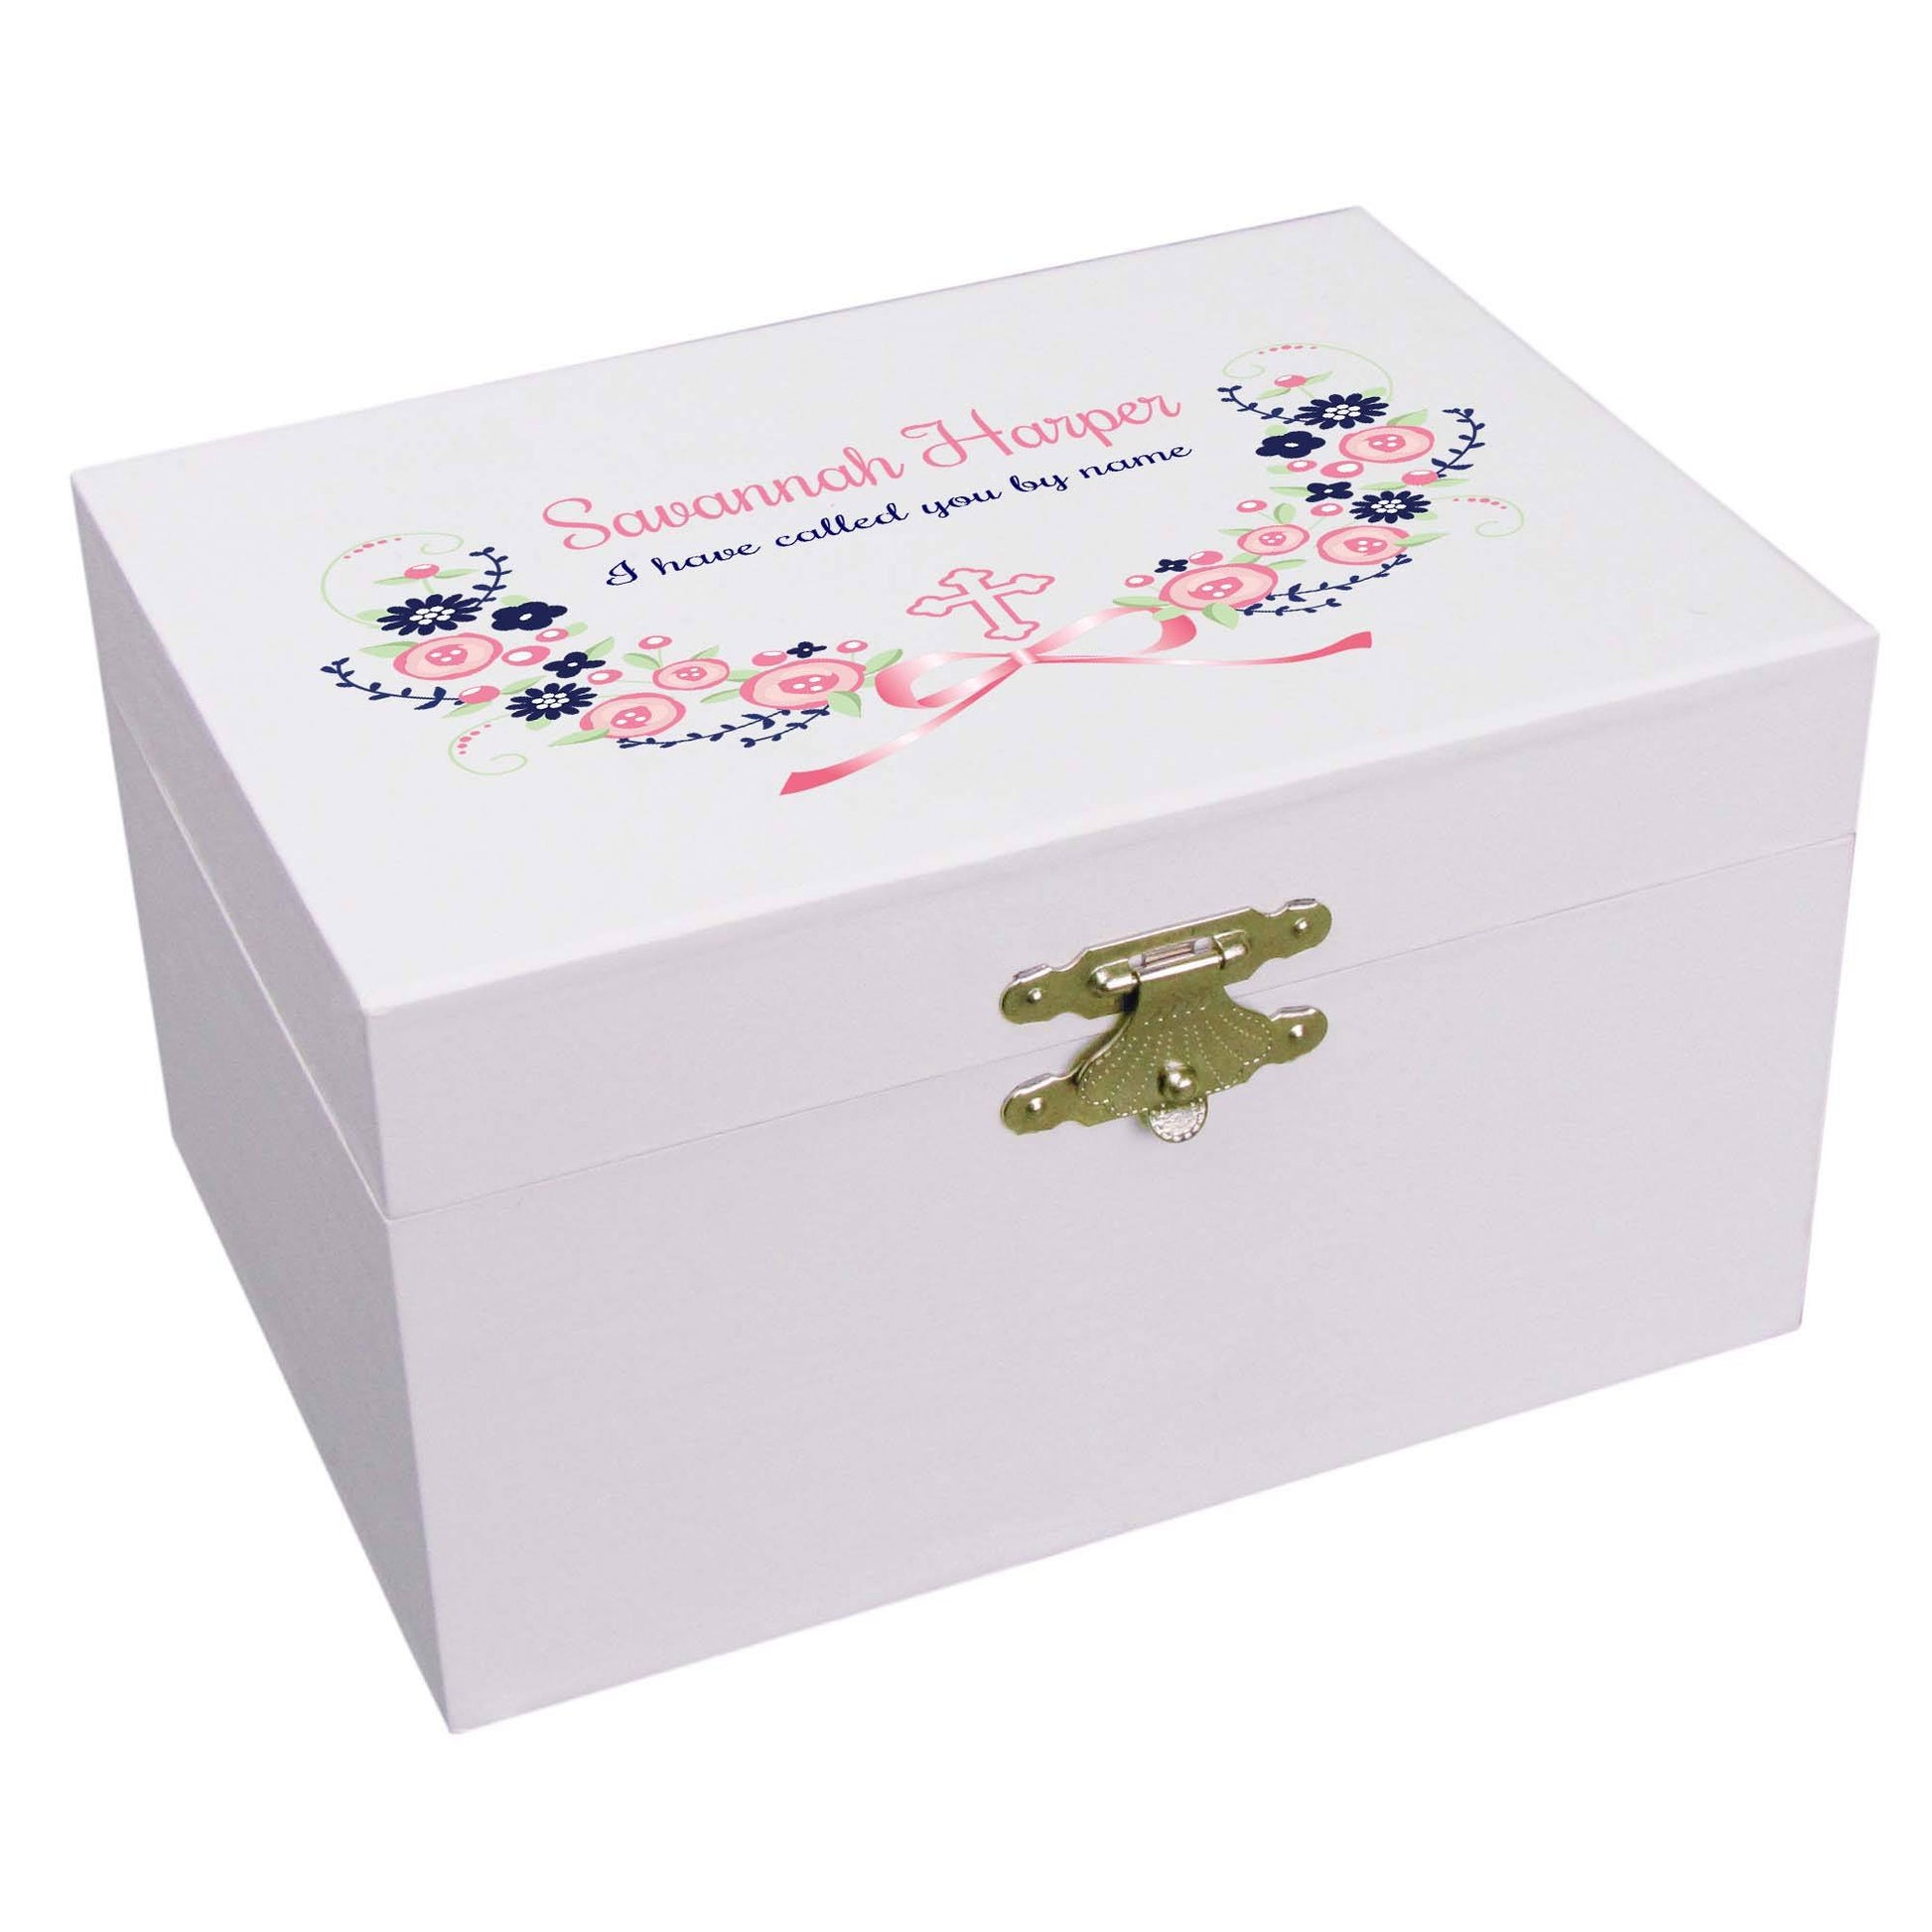 Personalized Ballerina Jewelry Box with floral cross design